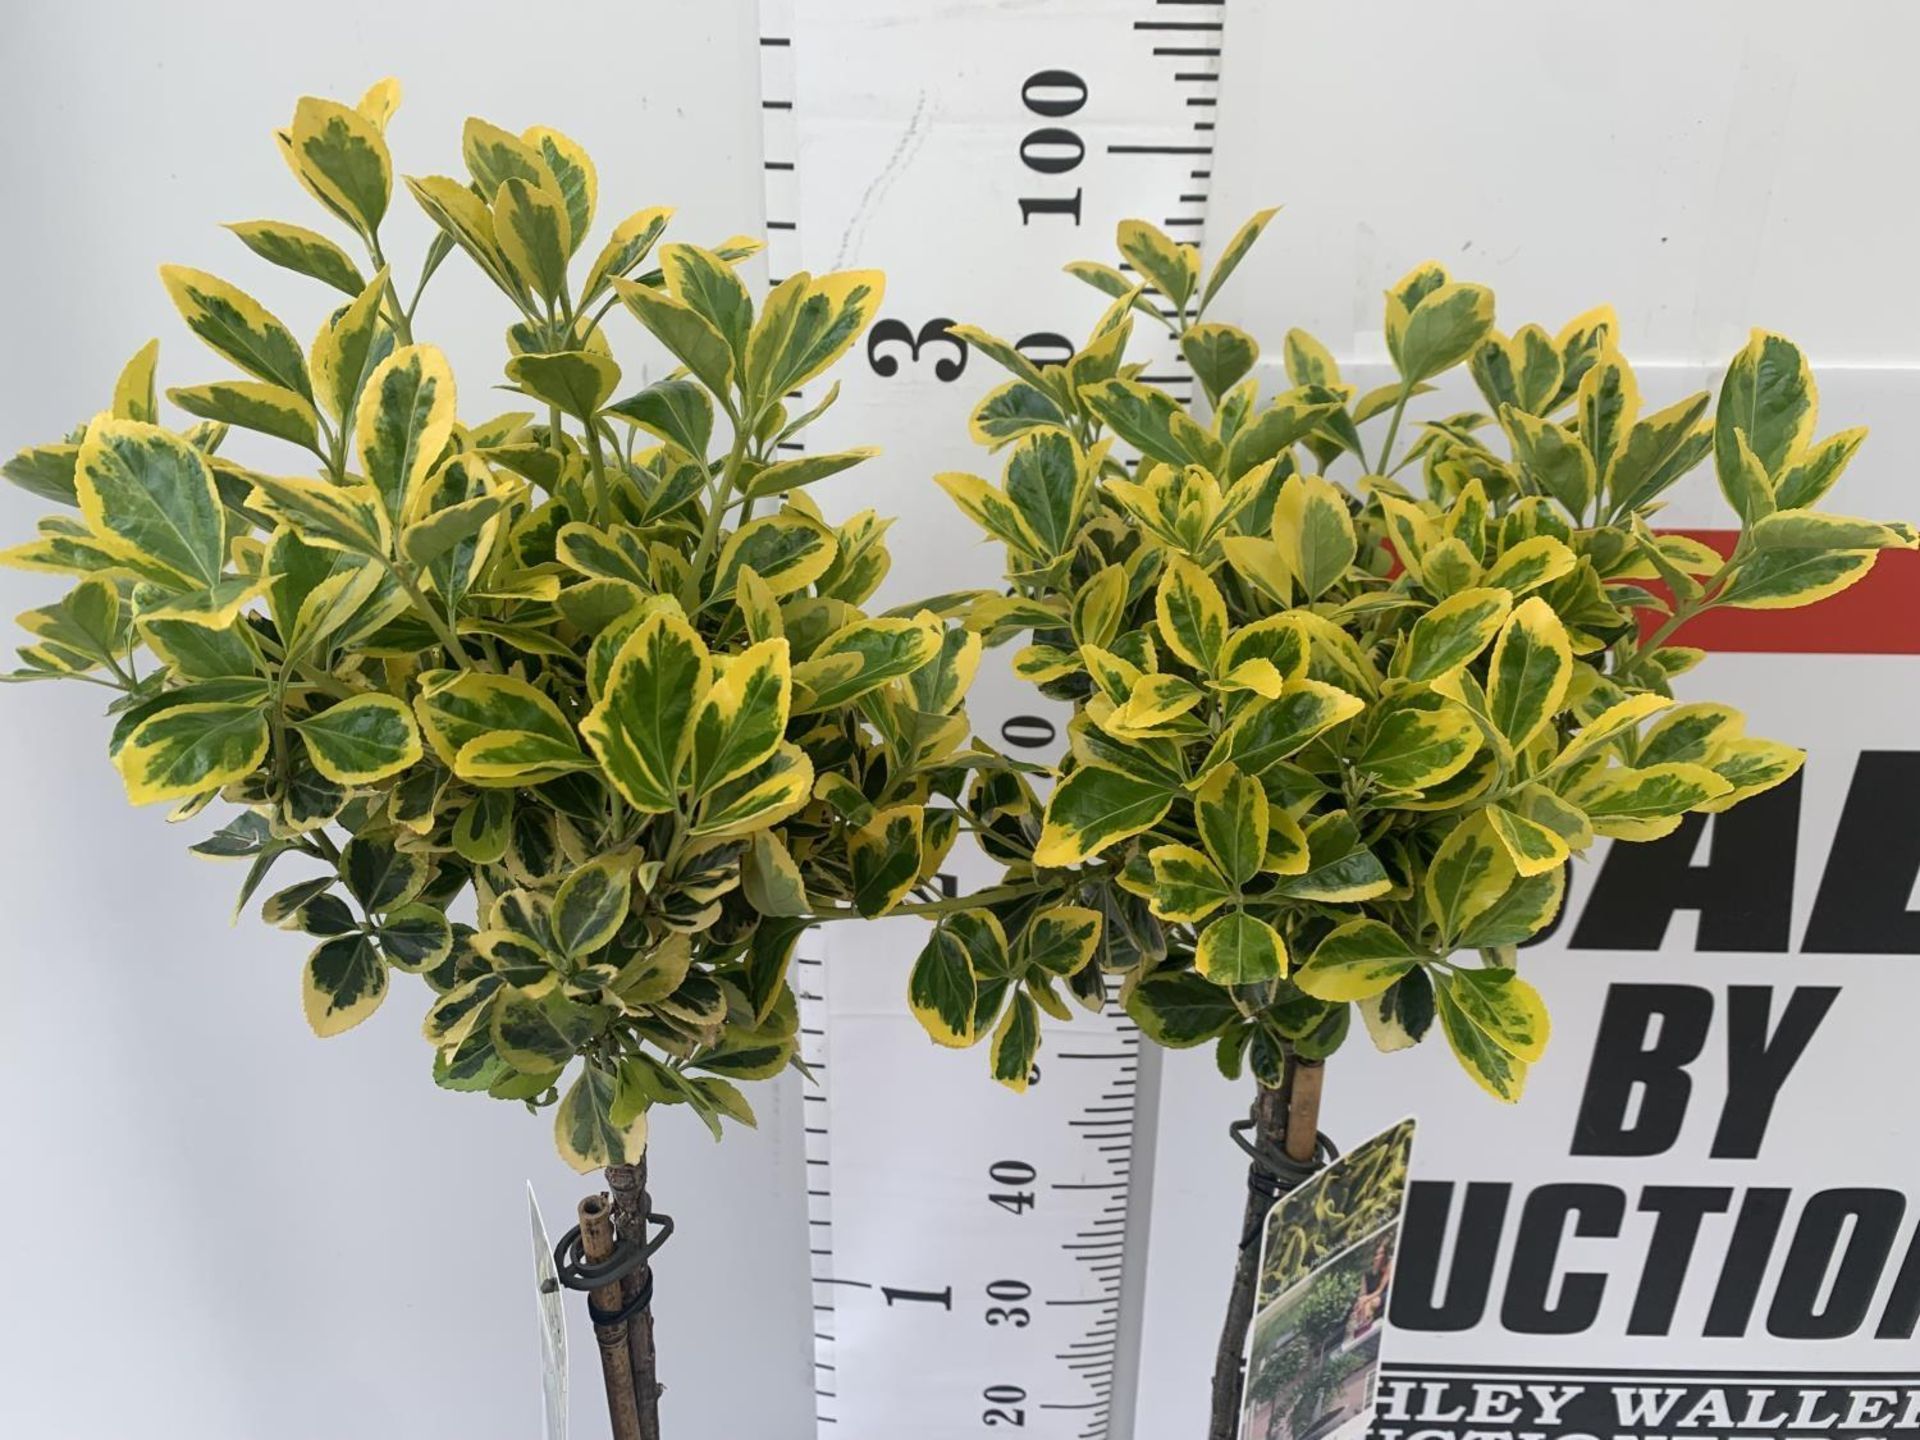 TWO STANDARD EUONYMUS JAPONICUS 'MARIEKE' IN 3 LTR POTS APPROX A METRE IN HEIGHT PLUS VAT TO BE SOLD - Image 2 of 5